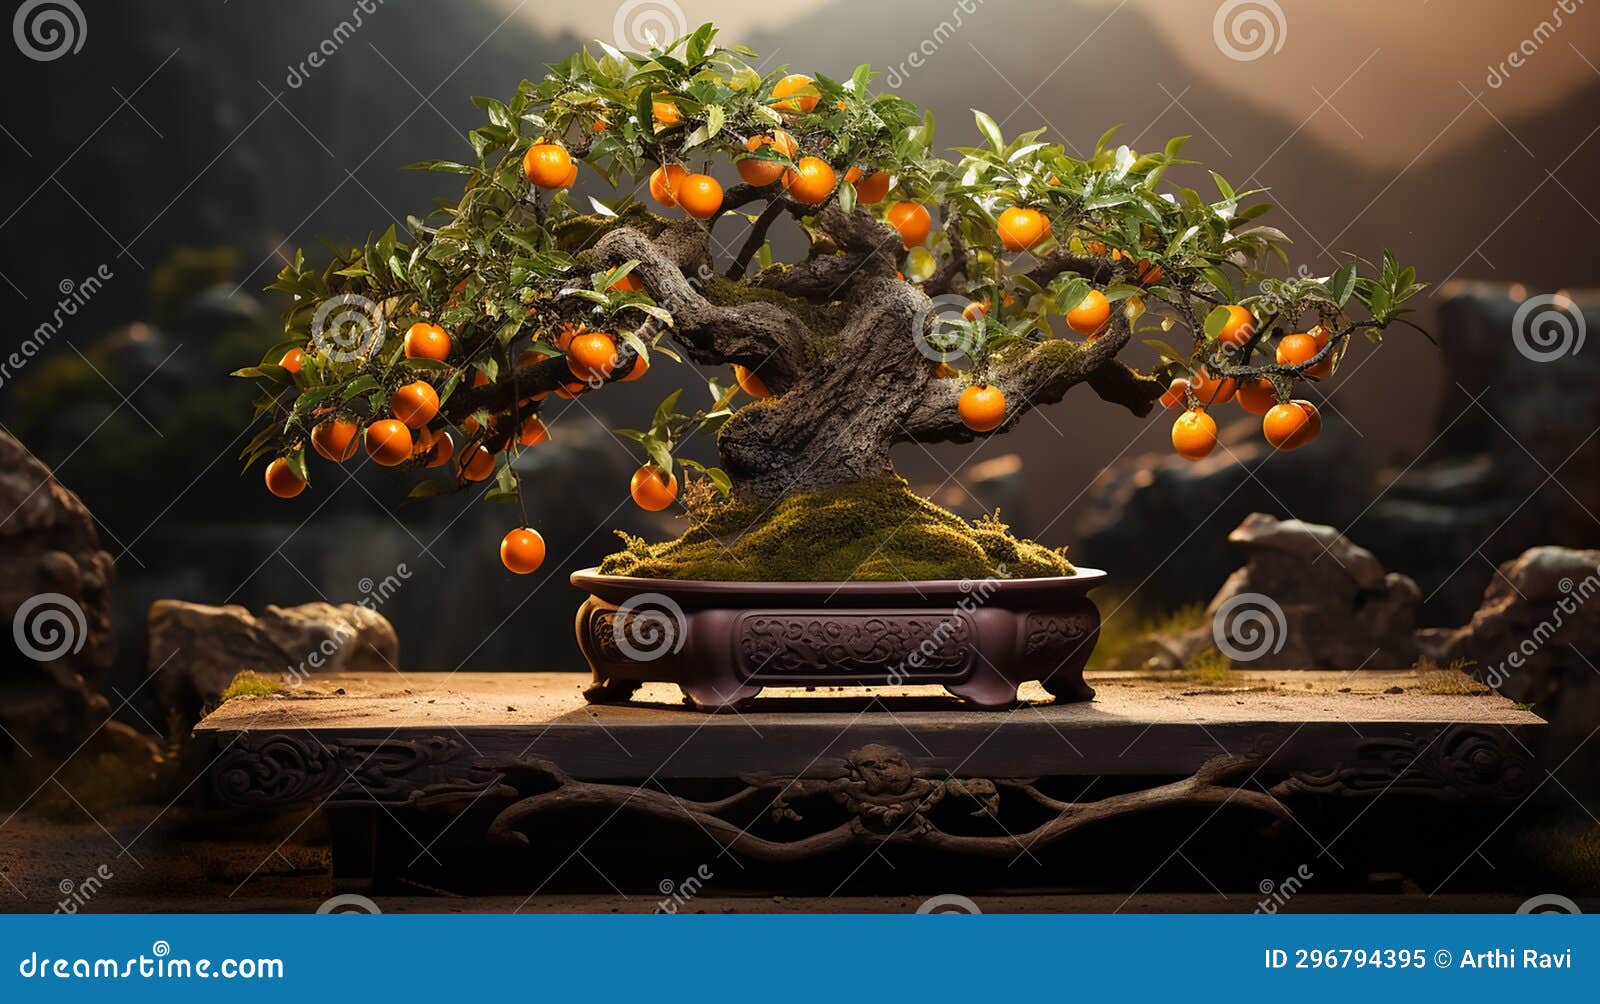 the beauty of a bonsai orange tree, its diminutive oranges adorned with dew drops